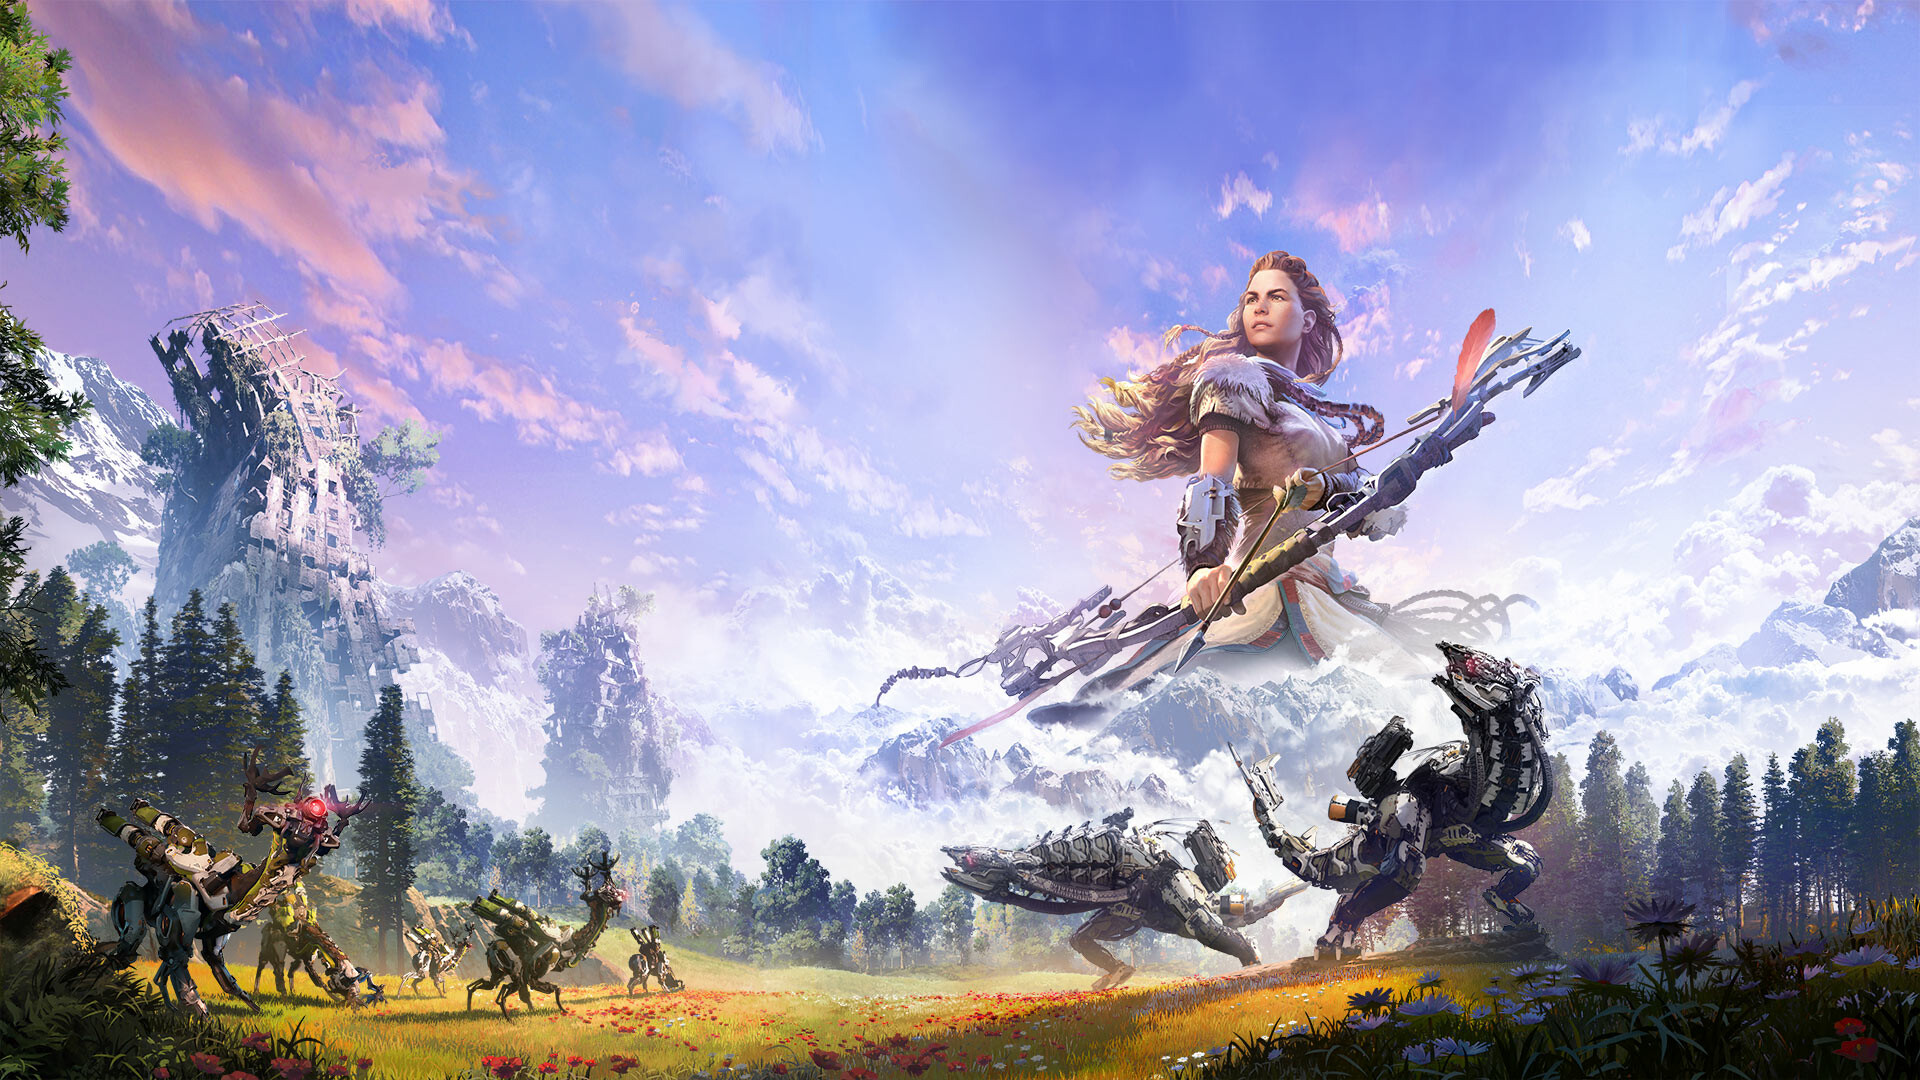 Horizon Zero Dawn: Guerrilla Games' RPG, One of the PS4's greatest games. 1920x1080 Full HD Background.